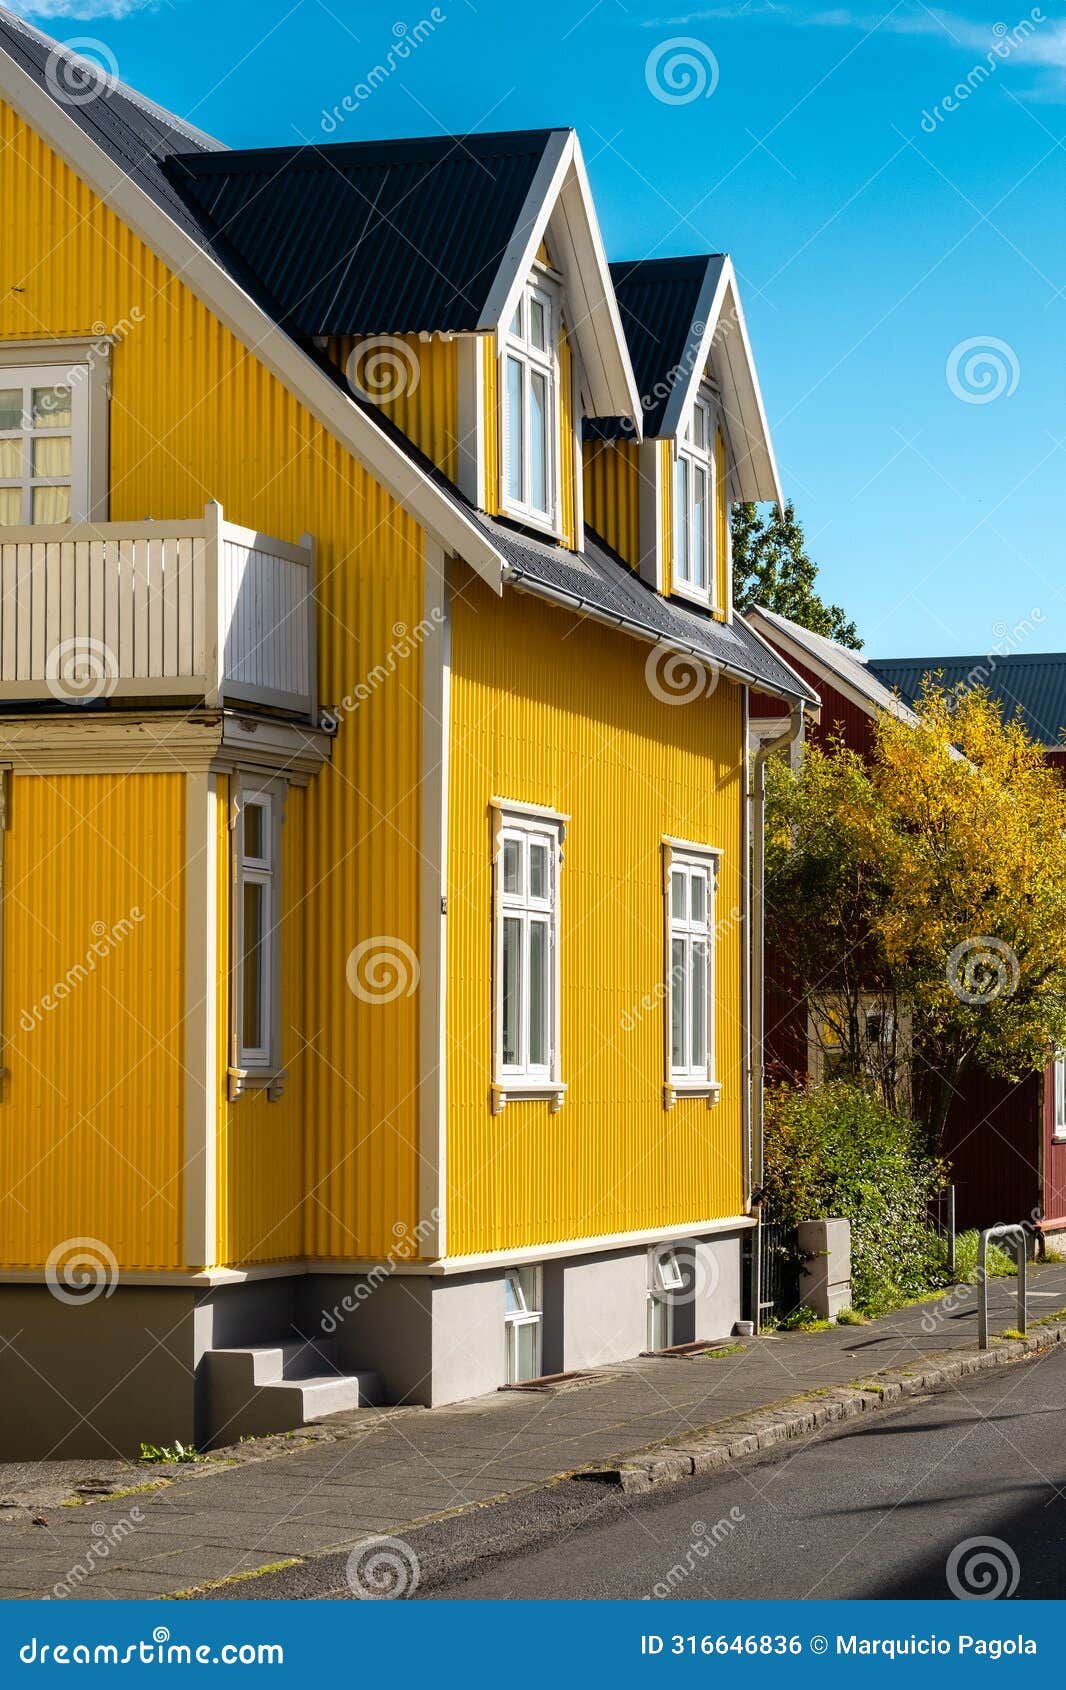 a yellow house with a black roof and white trim